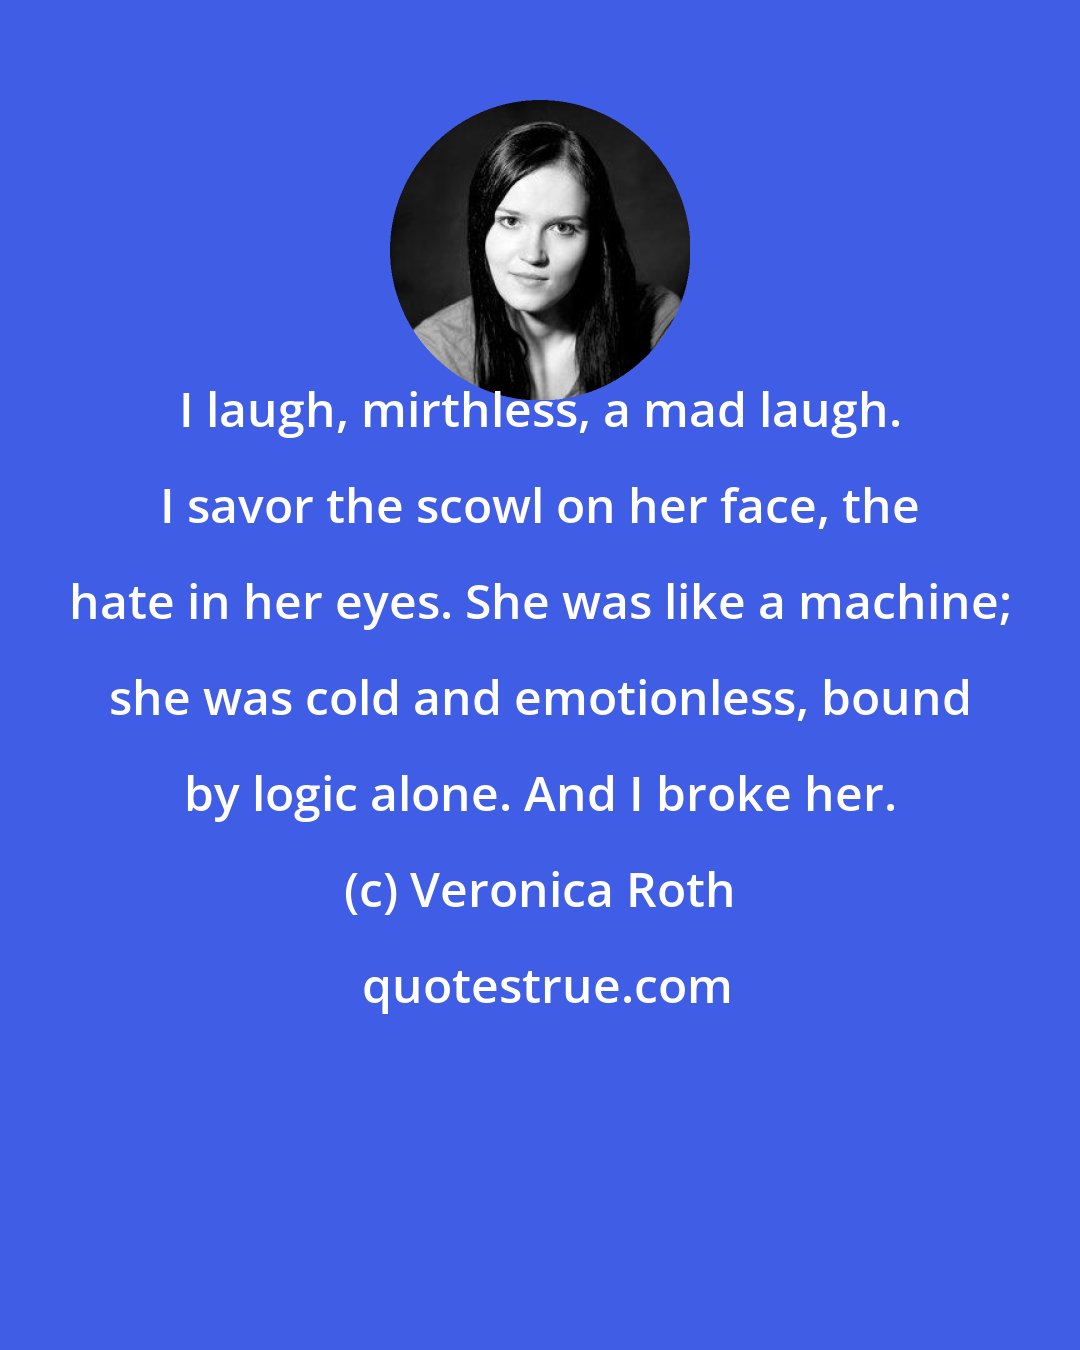 Veronica Roth: I laugh, mirthless, a mad laugh. I savor the scowl on her face, the hate in her eyes. She was like a machine; she was cold and emotionless, bound by logic alone. And I broke her.